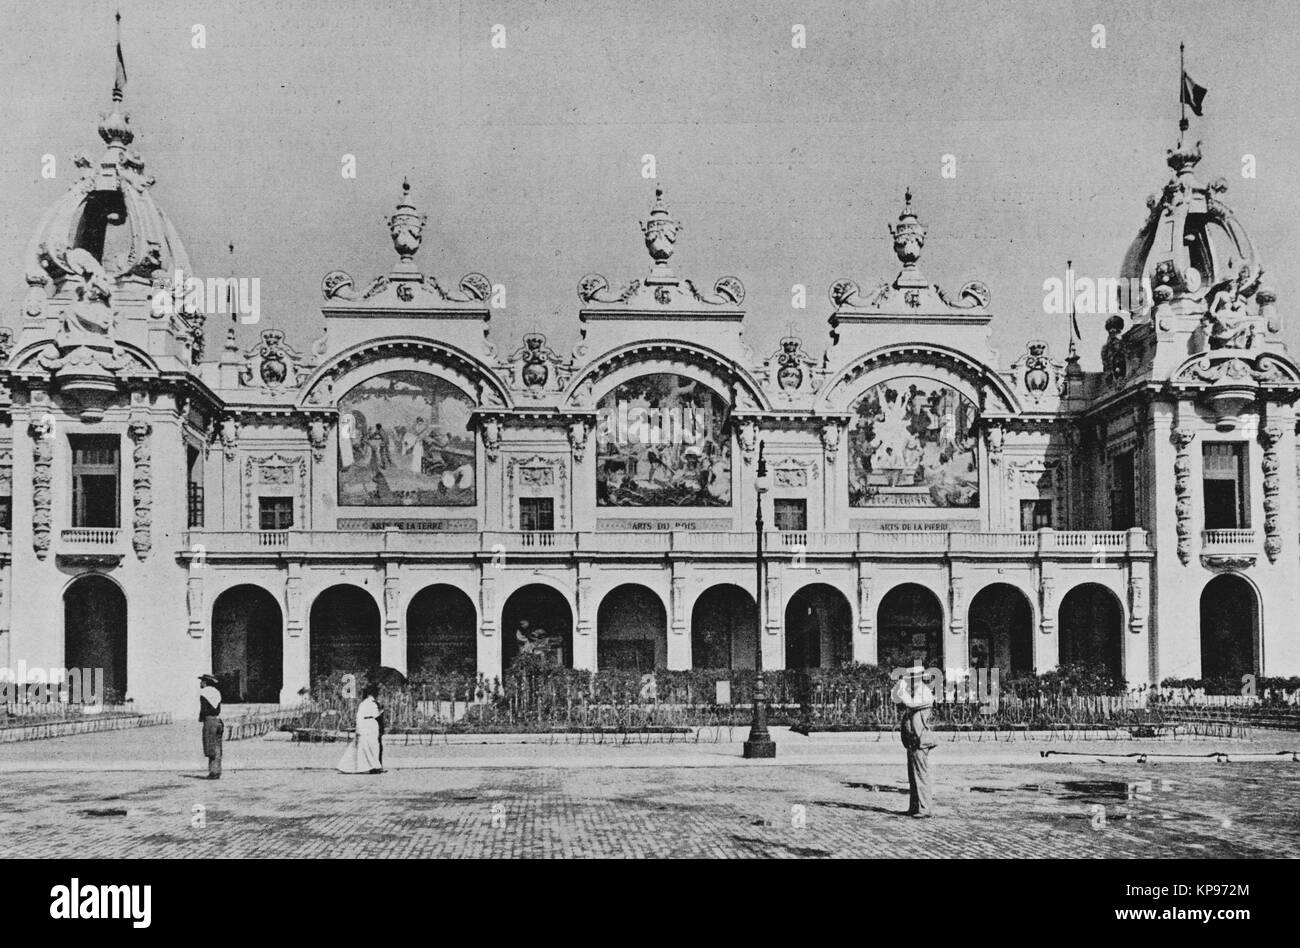 Palais des manufactures nationales, Universal Exhibition 1900 in Paris, Picture from the French weekly newspaper l'Illustration, 20th October 1900 Stock Photo